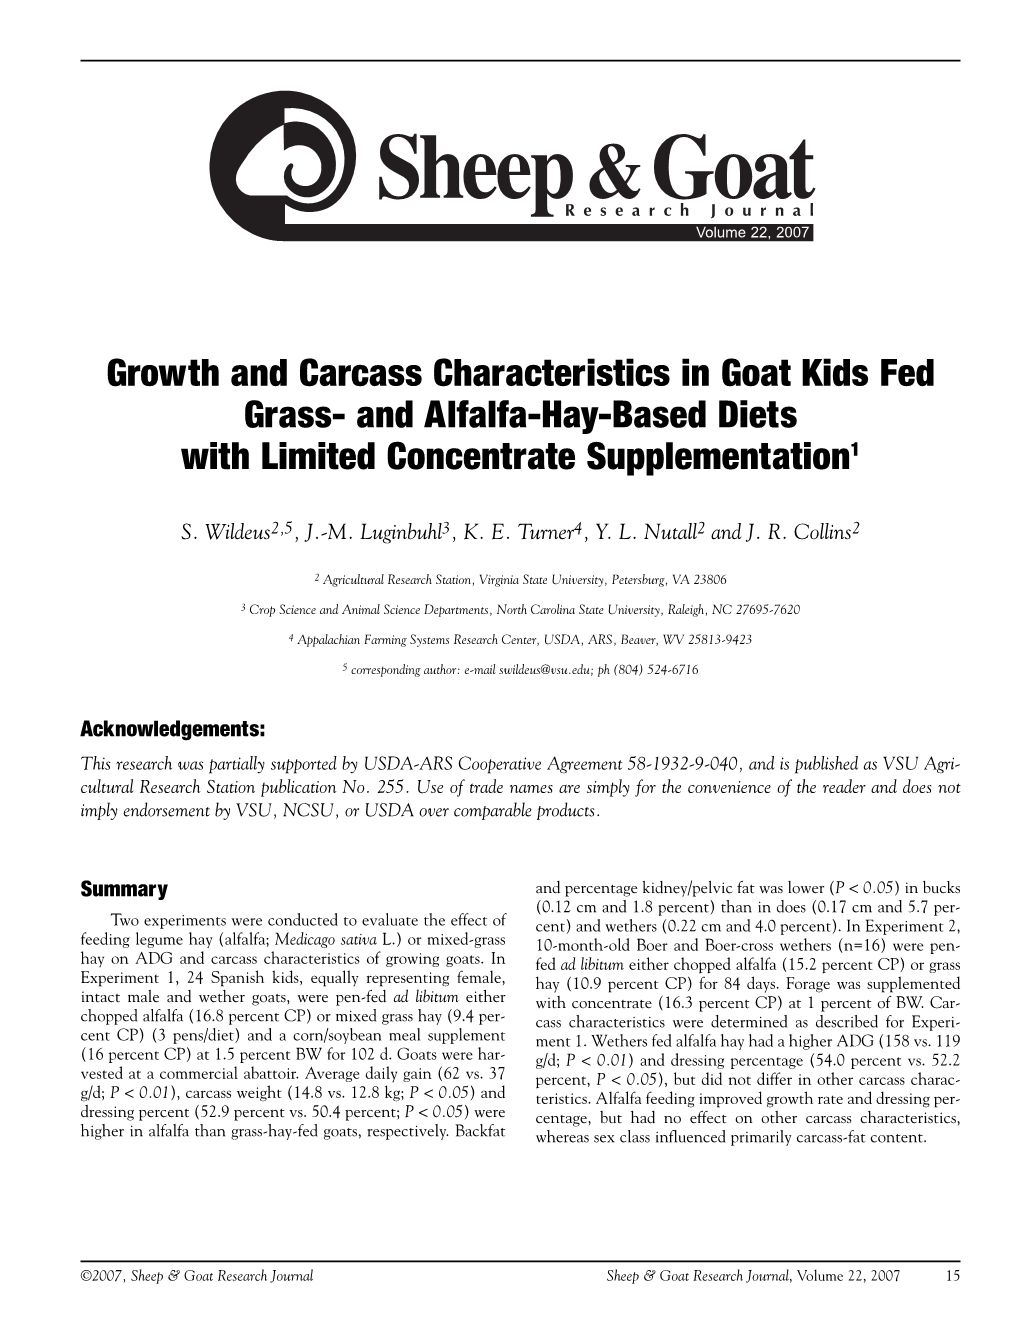 Growth and Carcass Characteristics in Goat Kids Fed Grass- and Alfalfa-Hay-Based Diets with Limited Concentrate Supplementation1